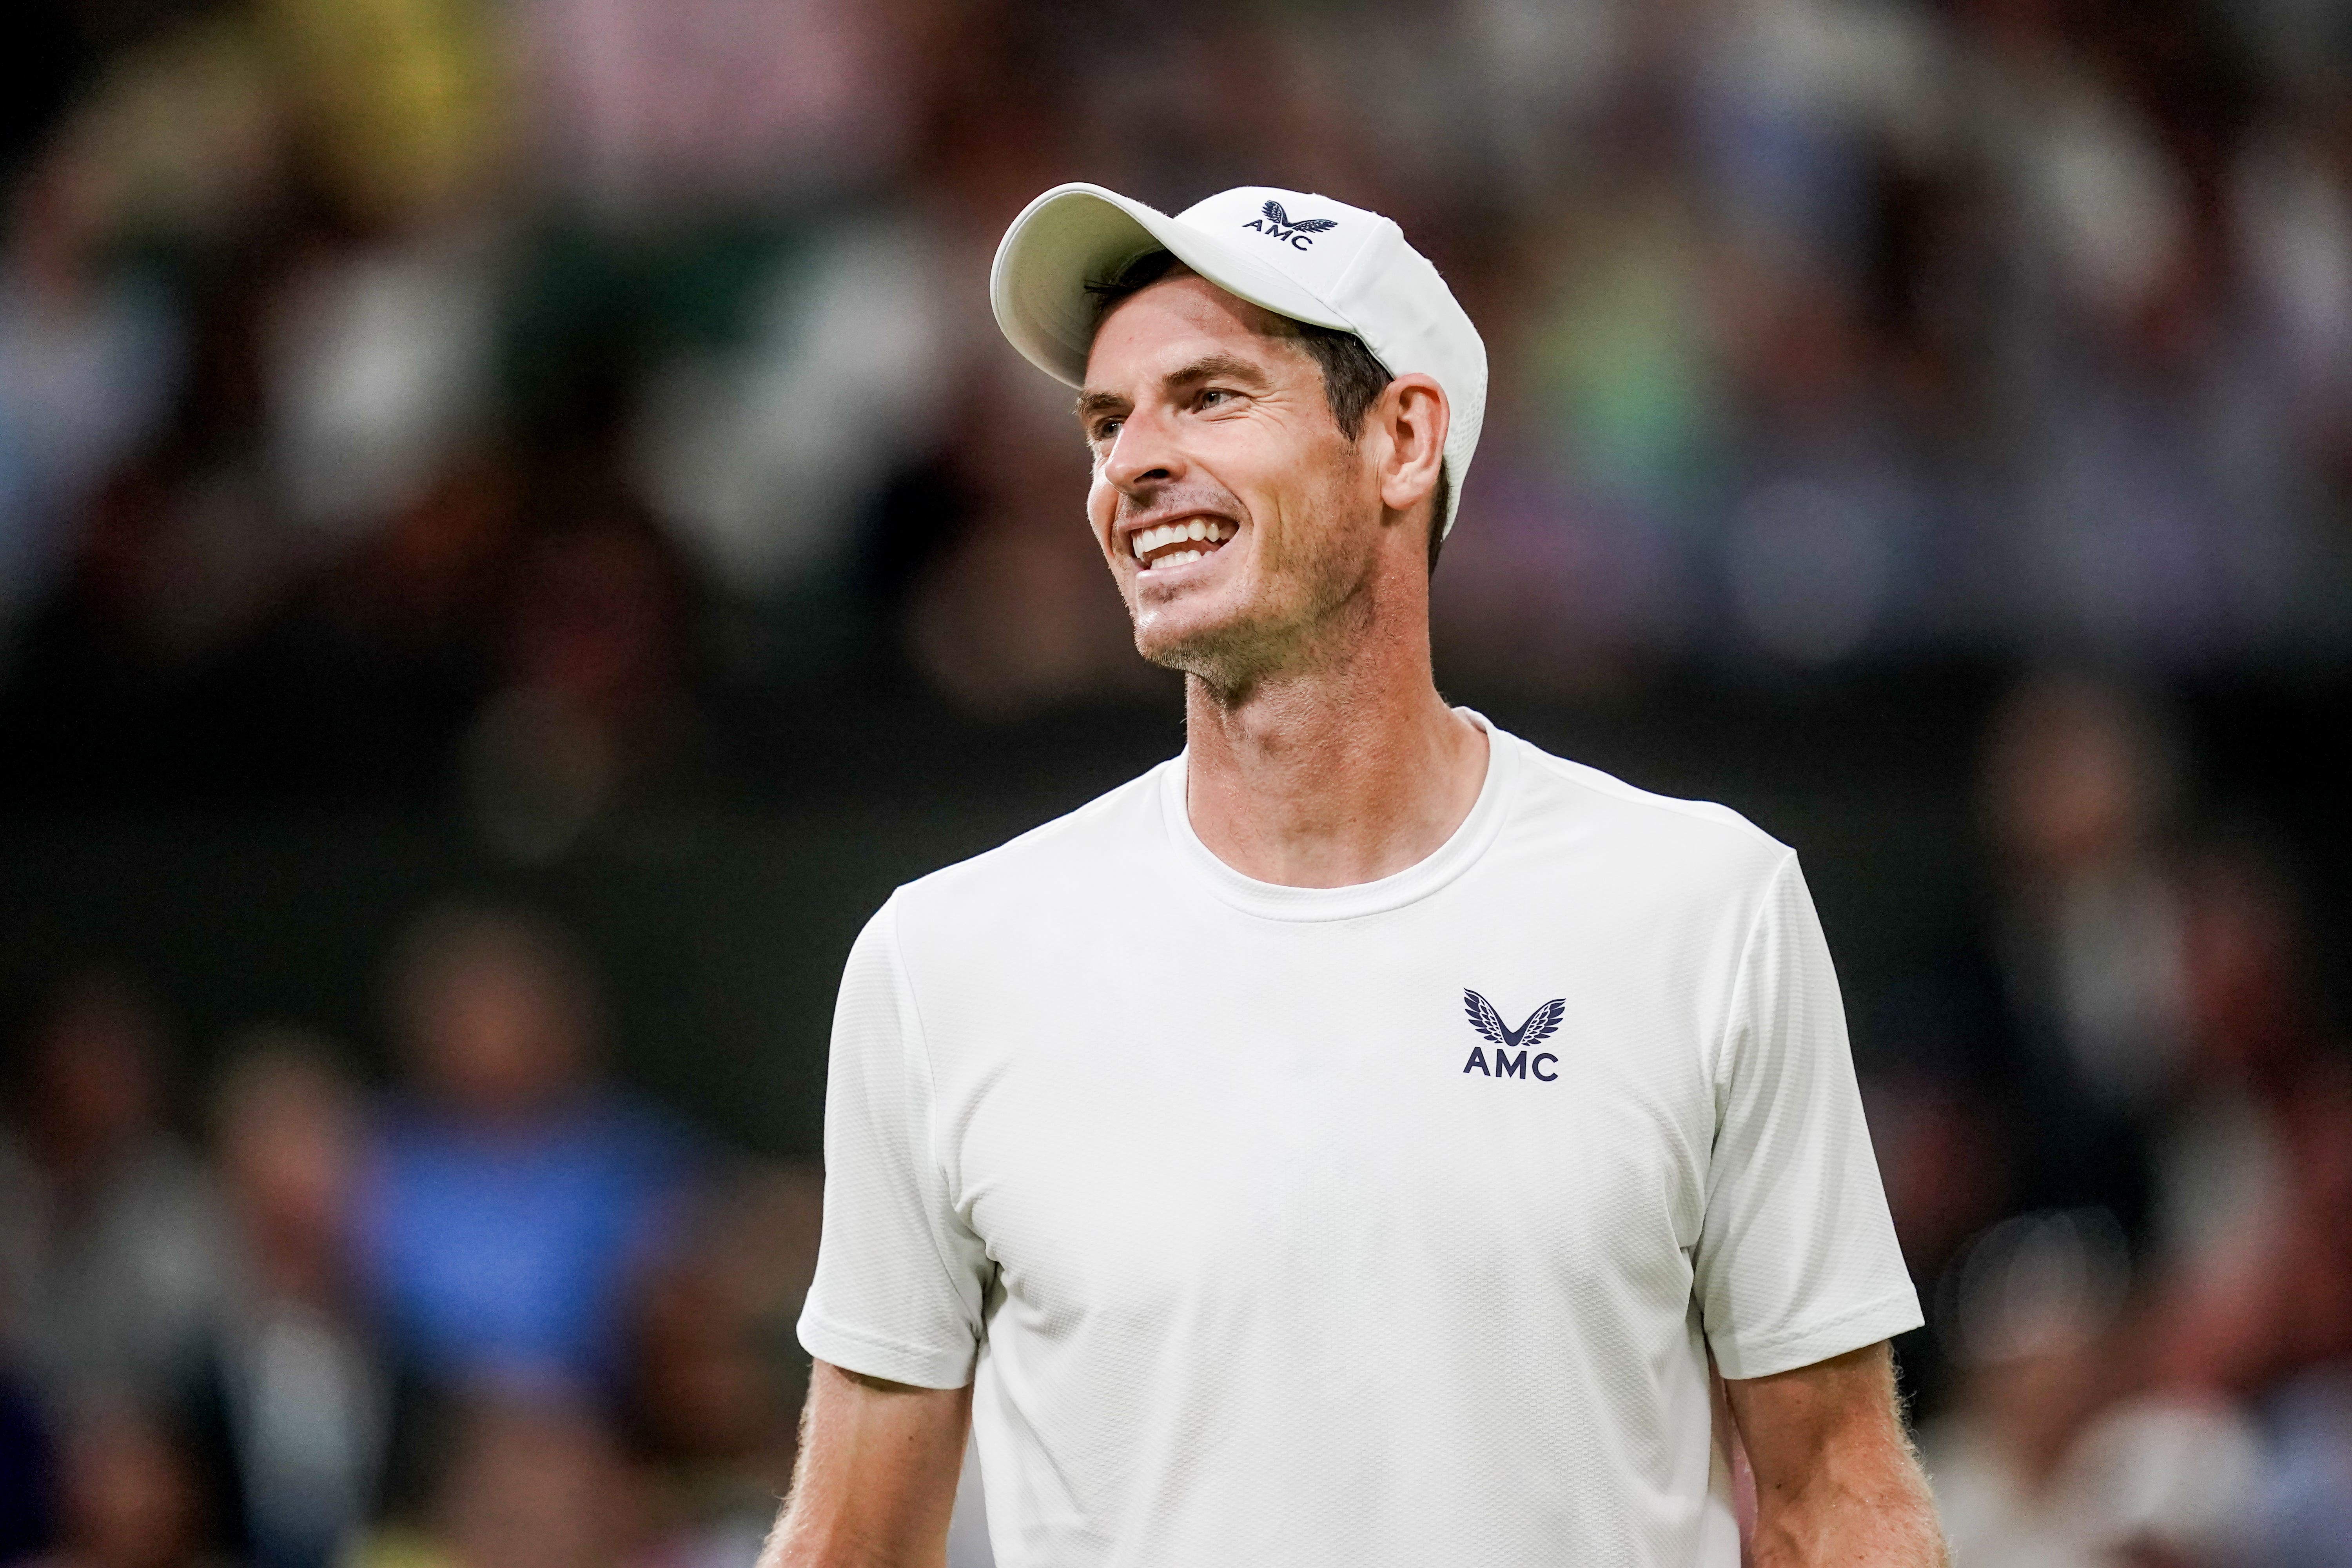 Andy Murray will get back on the grass next month